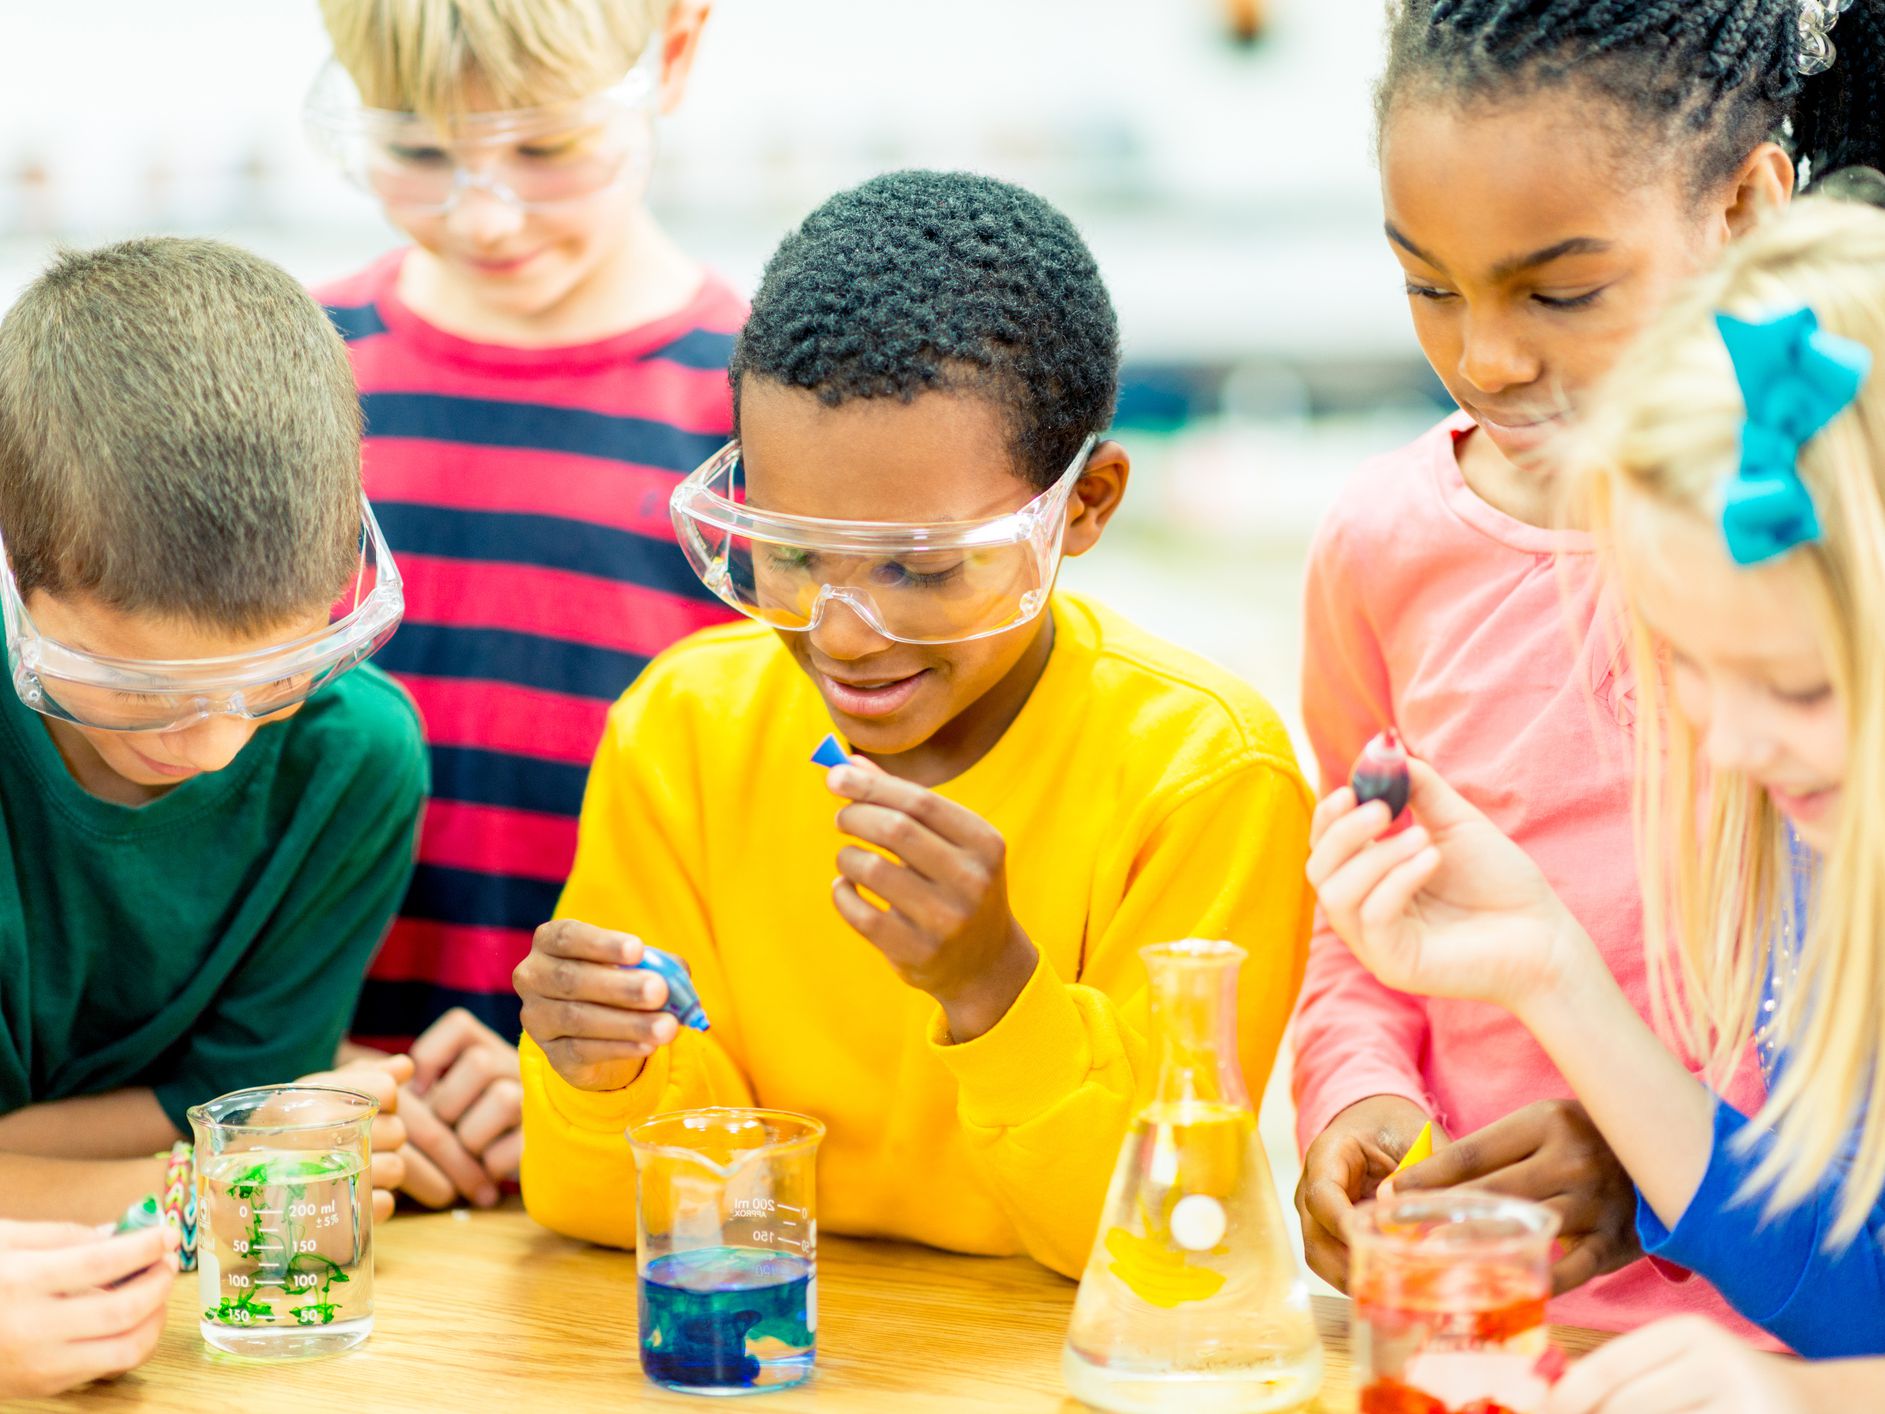 A multicultural group of children conduct a science experiment.